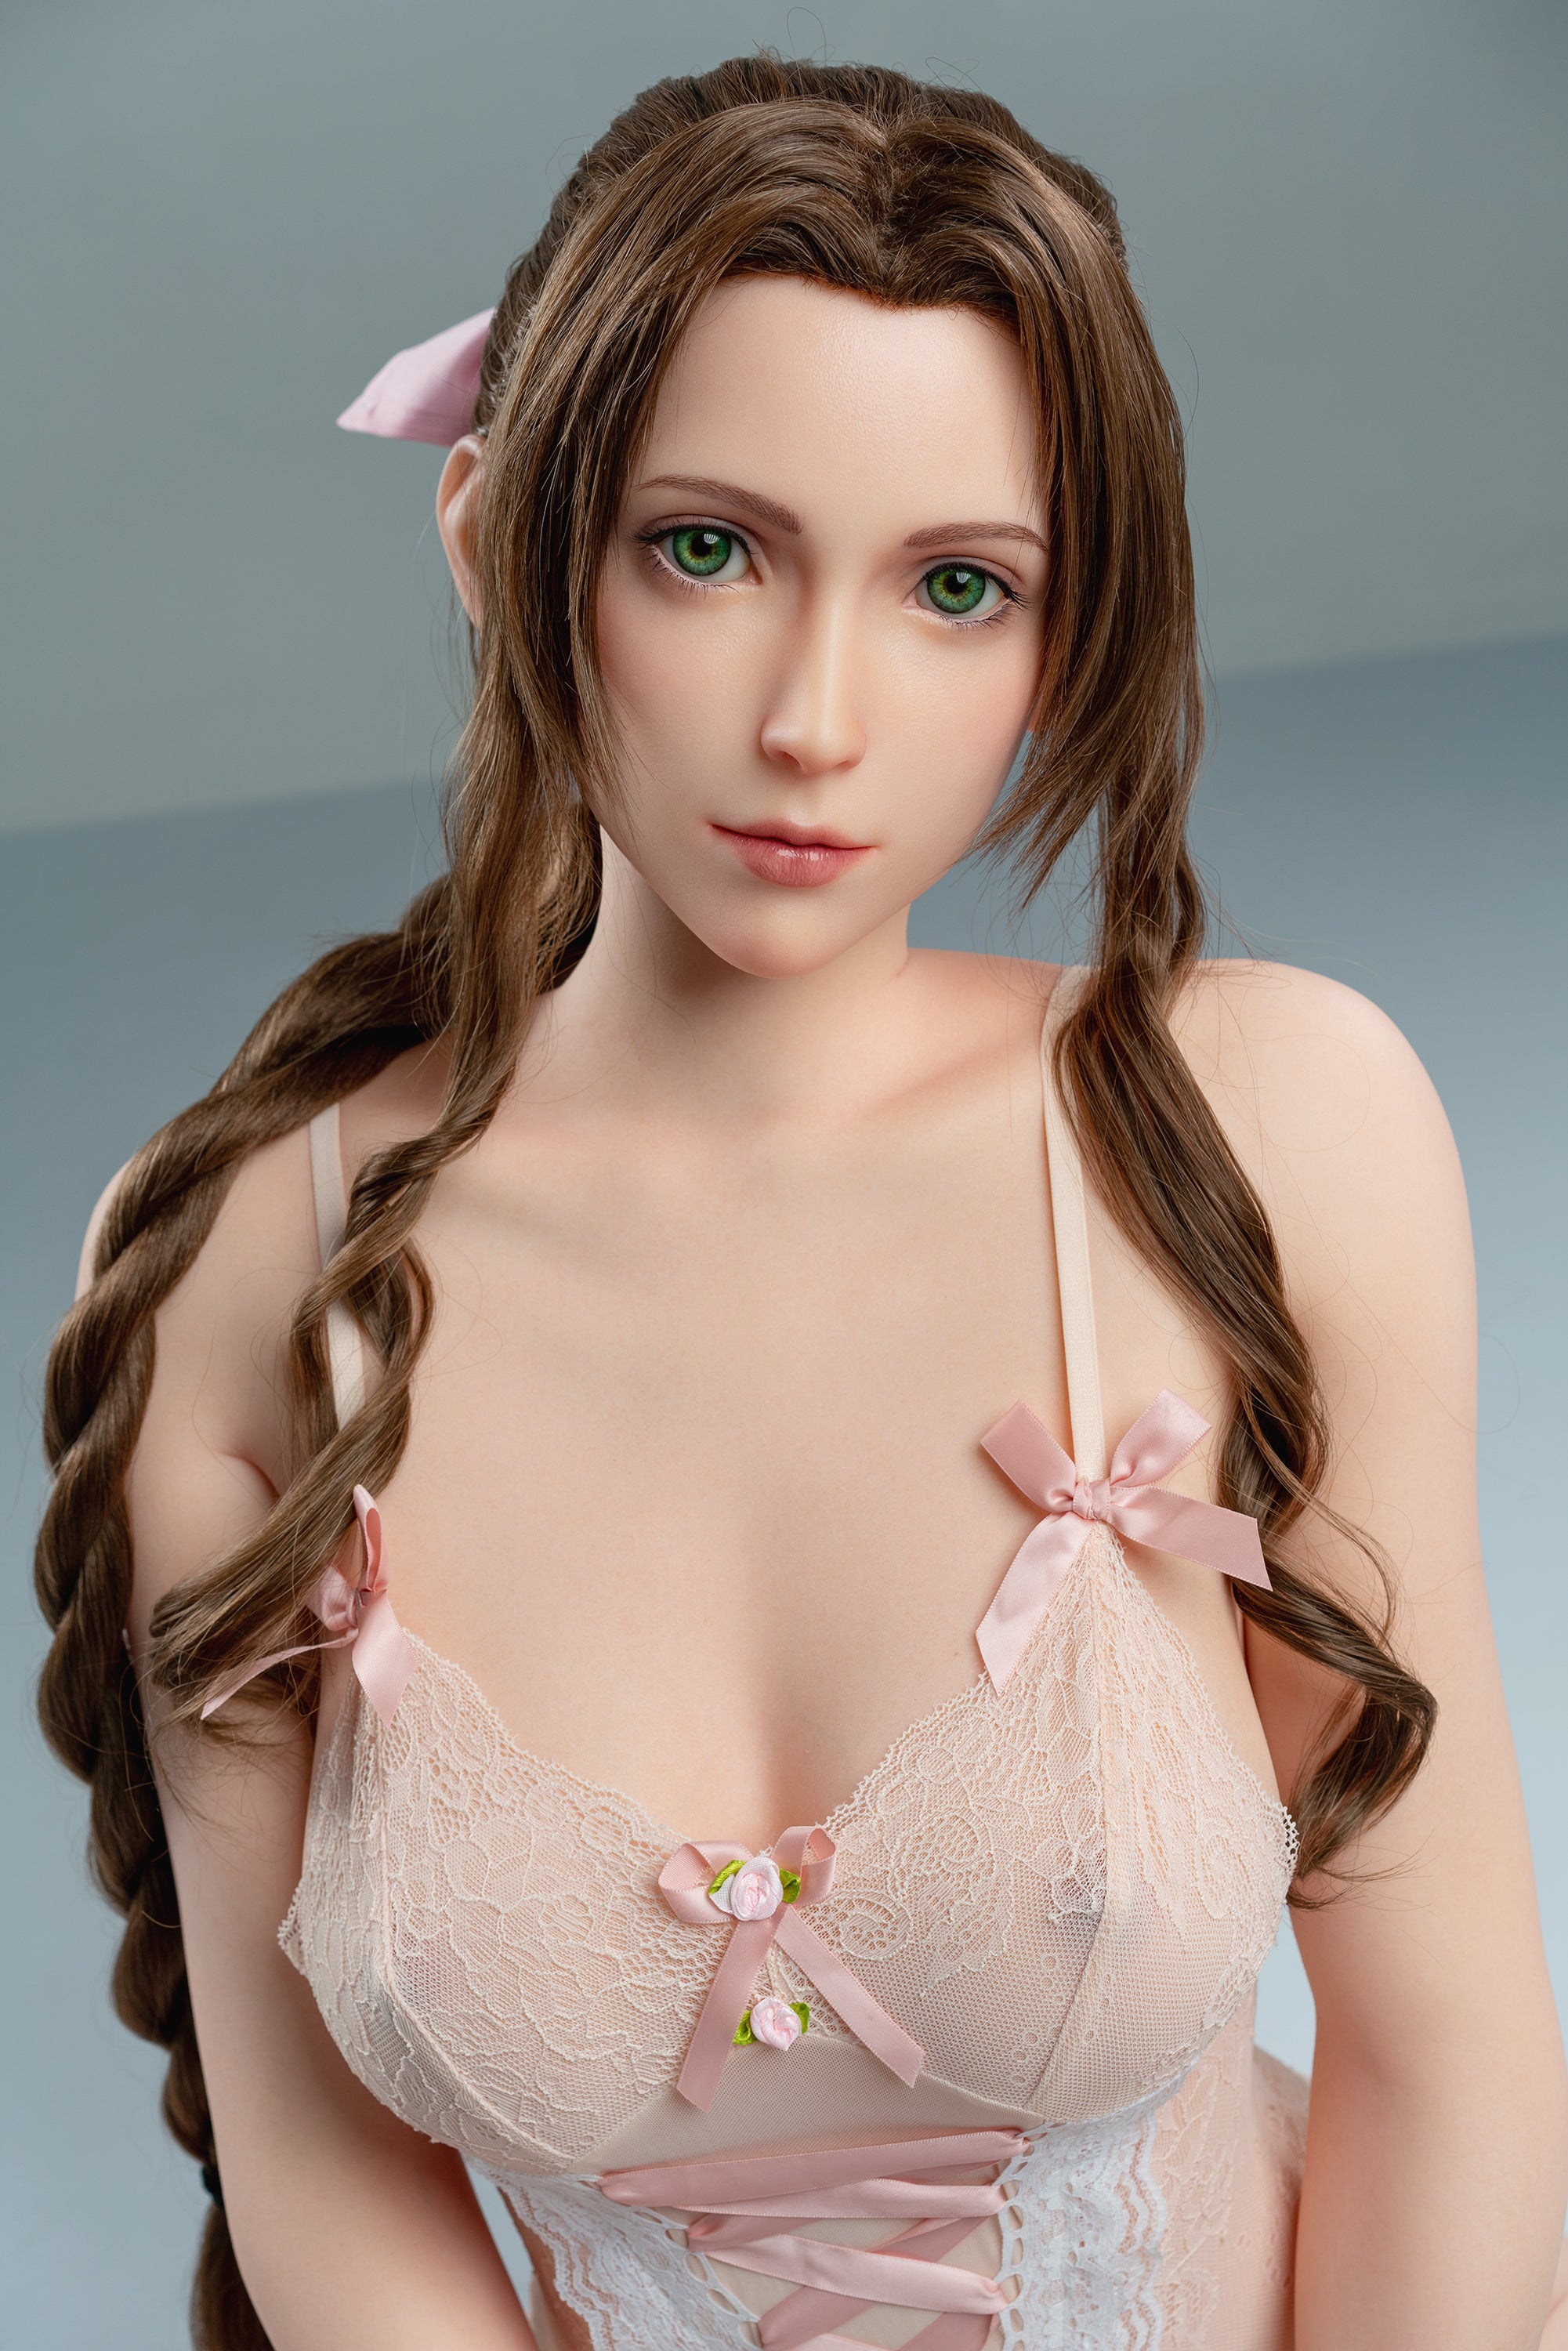 Game Lady 5ft 6/168cm Asian Style Realistic Sex Doll - Aerith -SexDollBabe